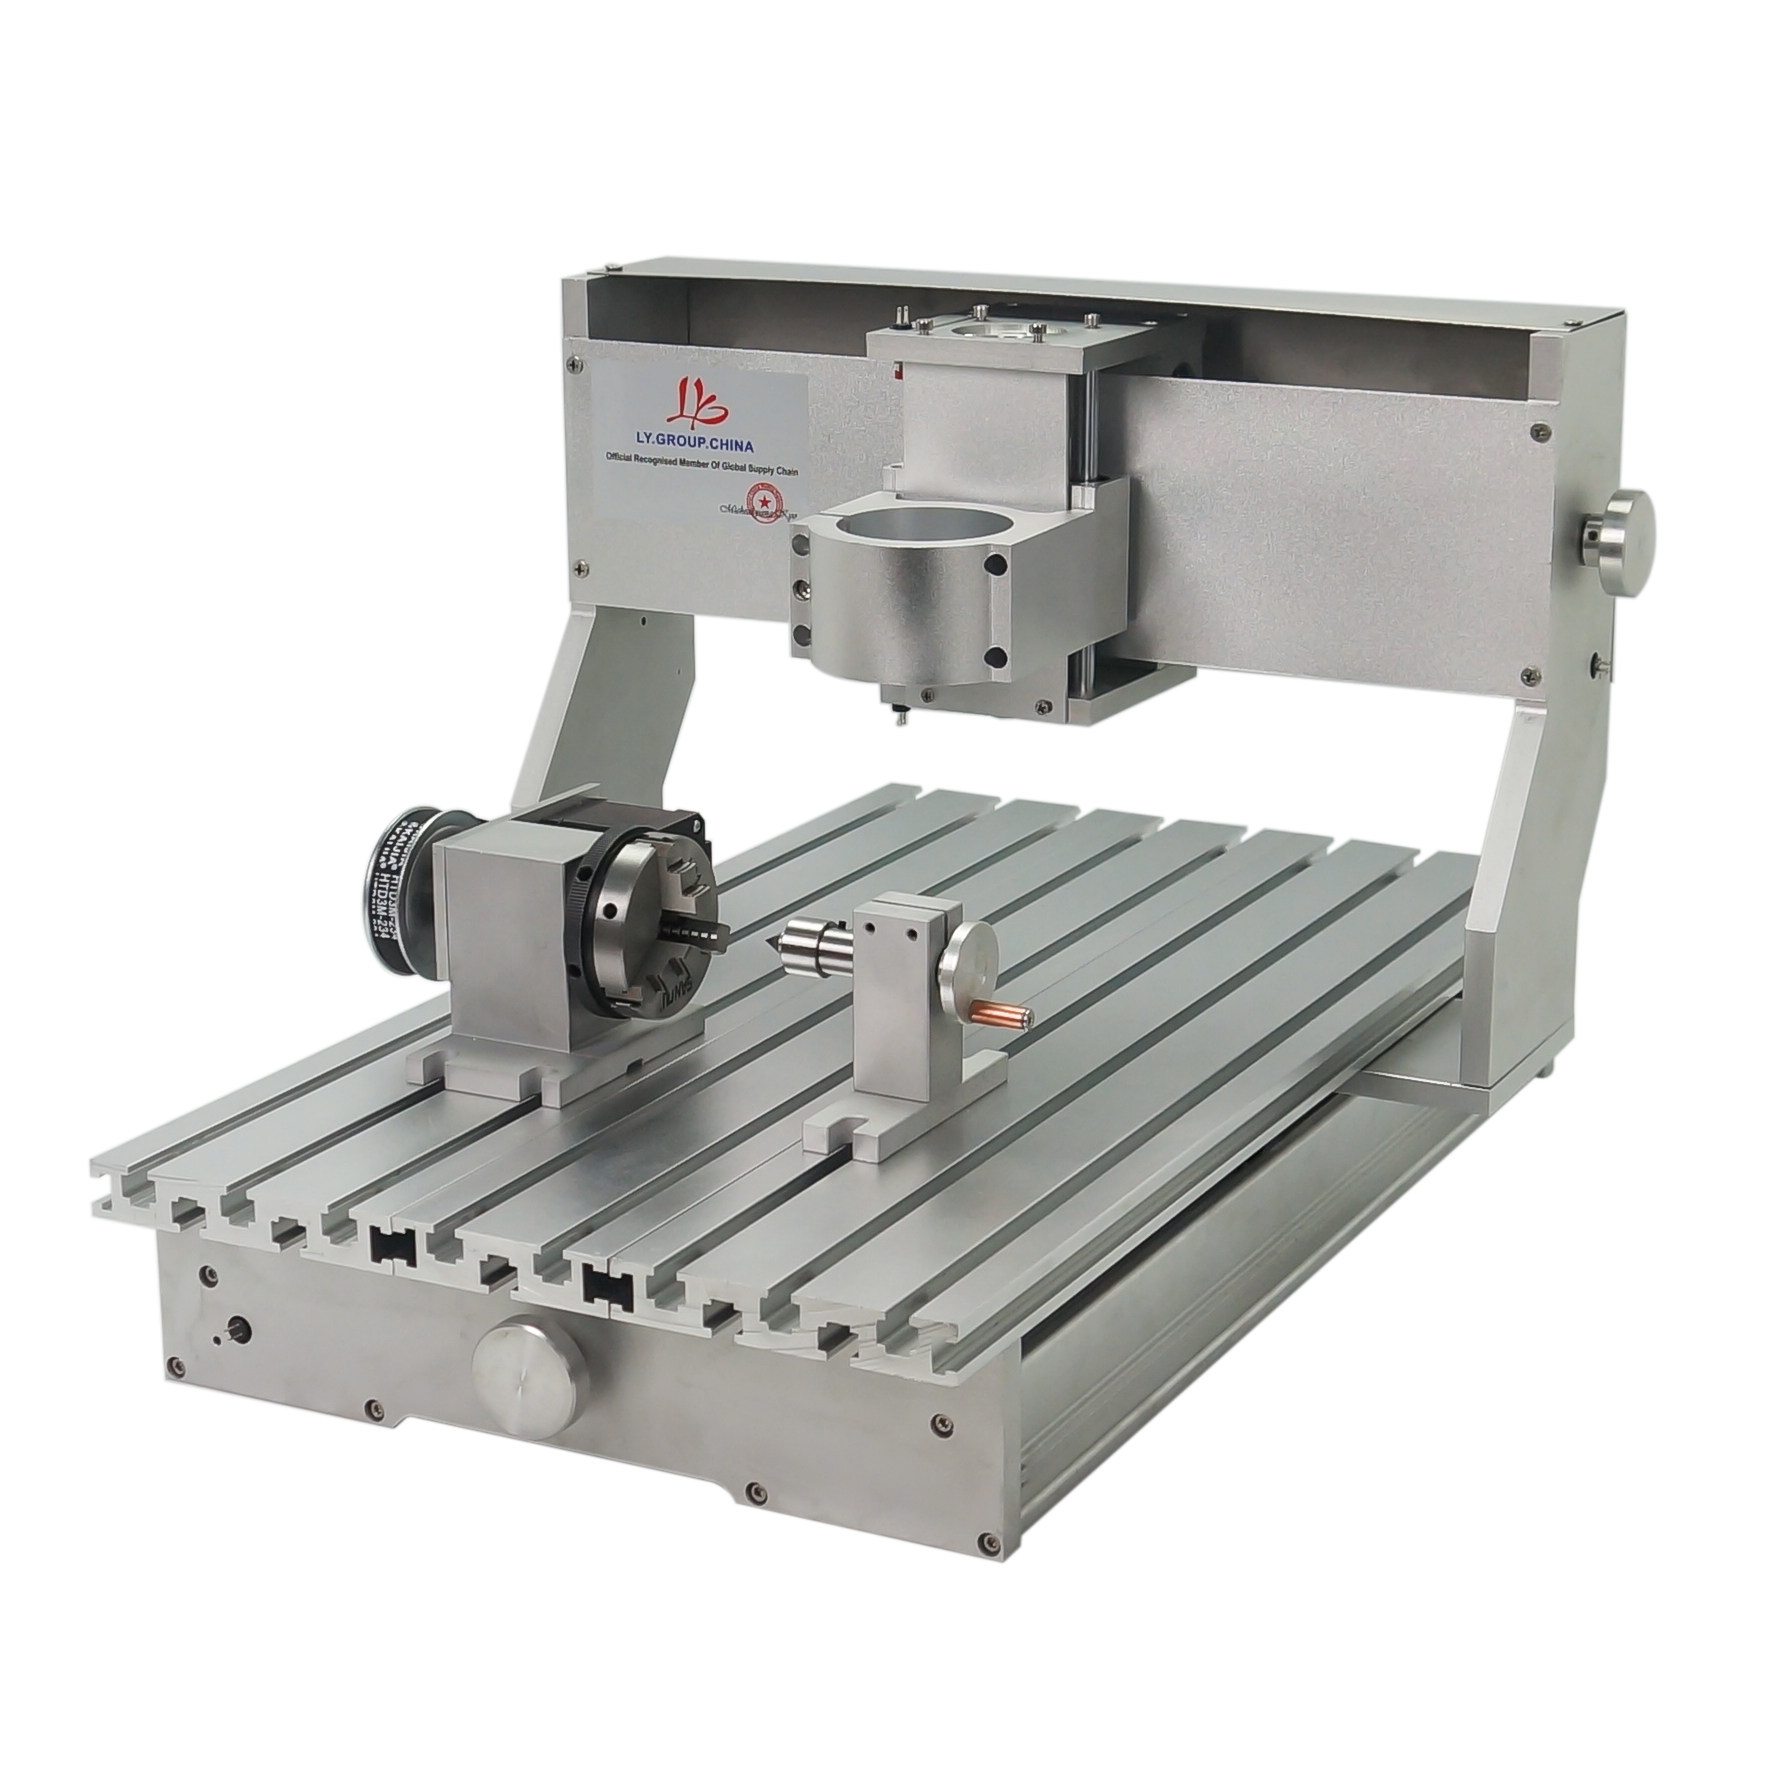 CNC Router Frame 3040 engraving milling machine bed ball screw metal wood aluminium frame cnc kit 3 4 rotary axis optional